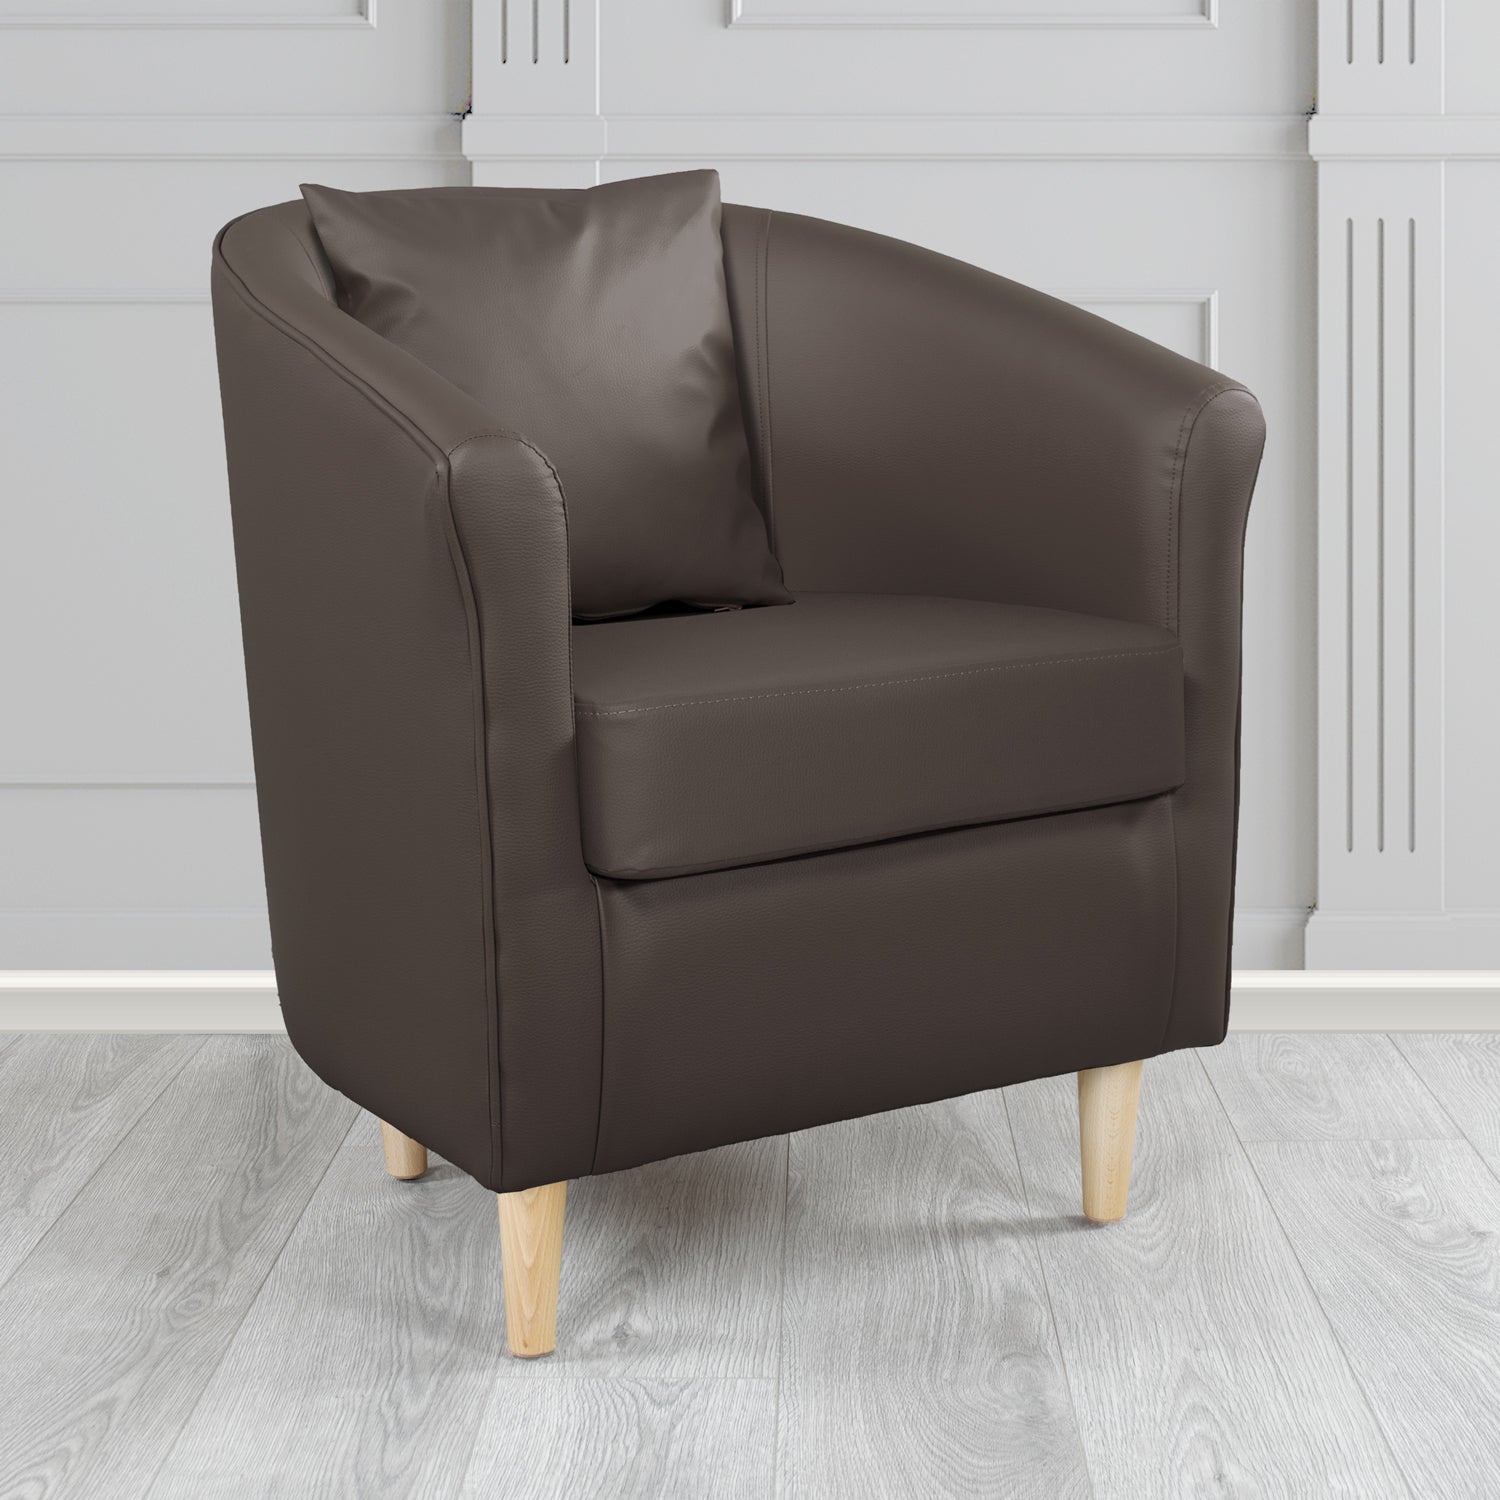 St Tropez Tub Chair with Scatter Cushion in Madrid Chocolate Faux Leather - The Tub Chair Shop